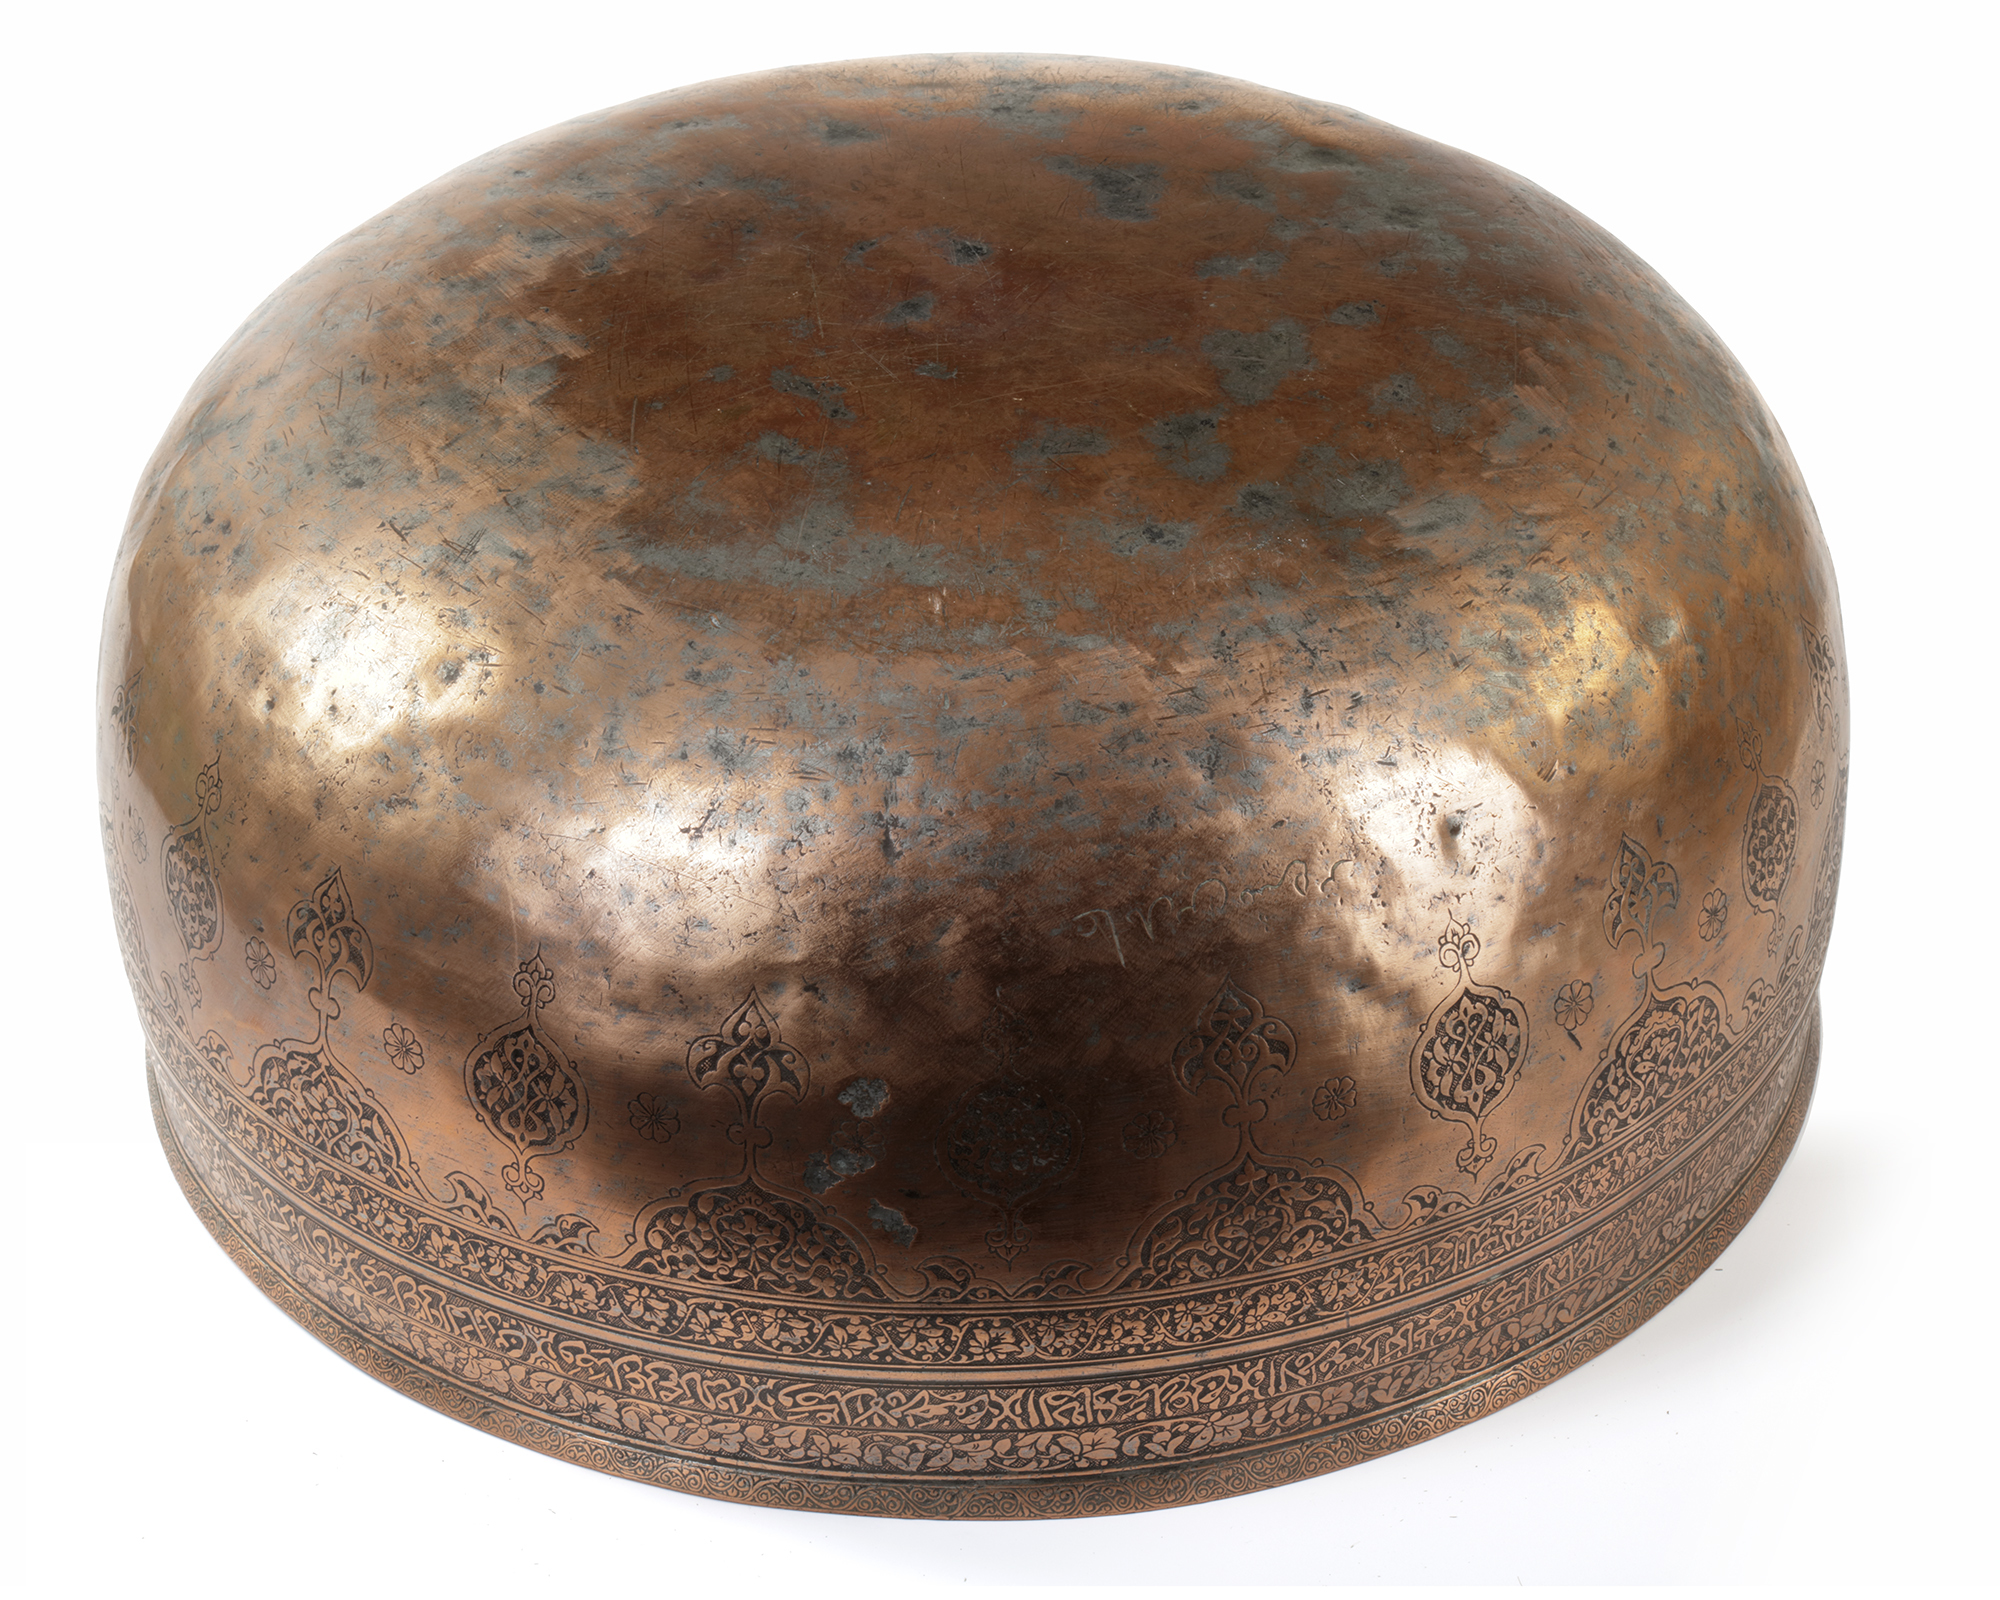 A MONUMENTAL LATE TIMURID ENGRAVED COPPER BOWL, CENTRAL ASIA, LATE 15TH-EARLY 16TH CENTURY - Image 5 of 12